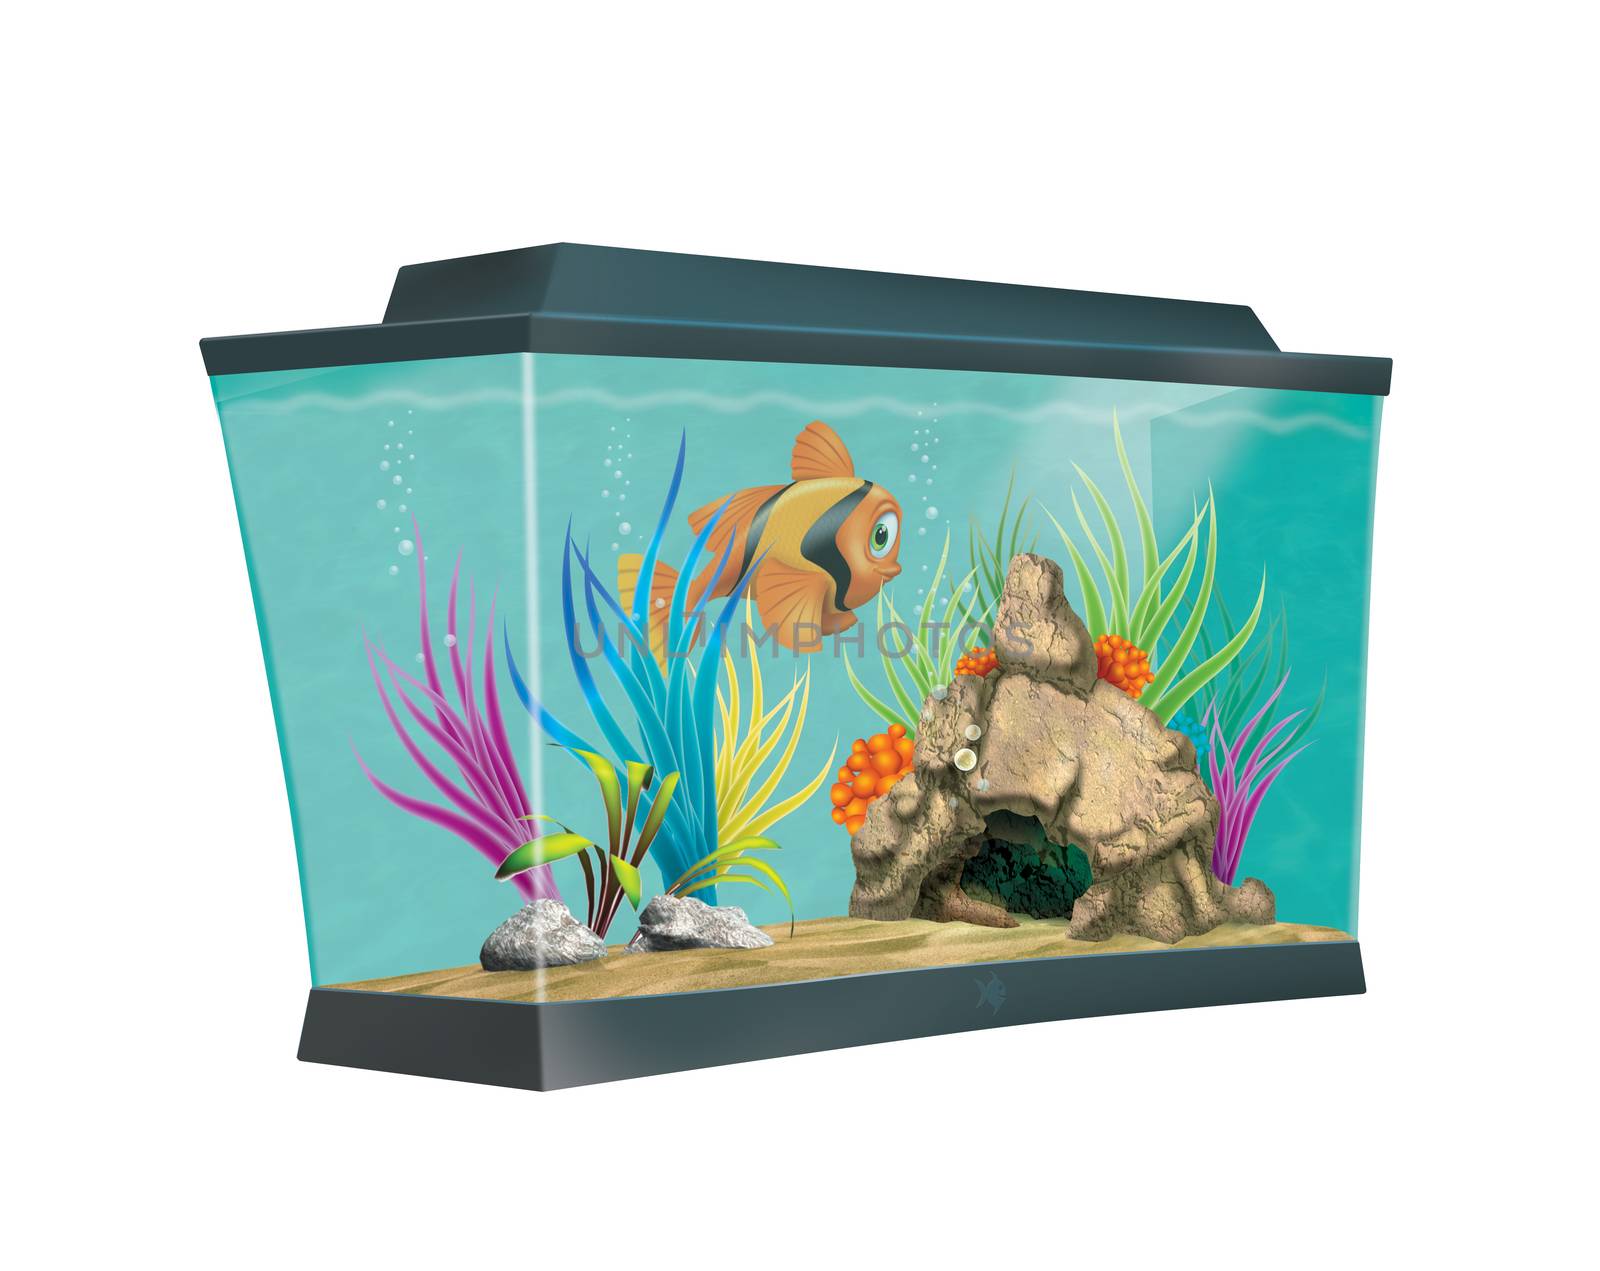 Cute striped goldfish swimming in a colorful aquarium with water plants and stone cavern.